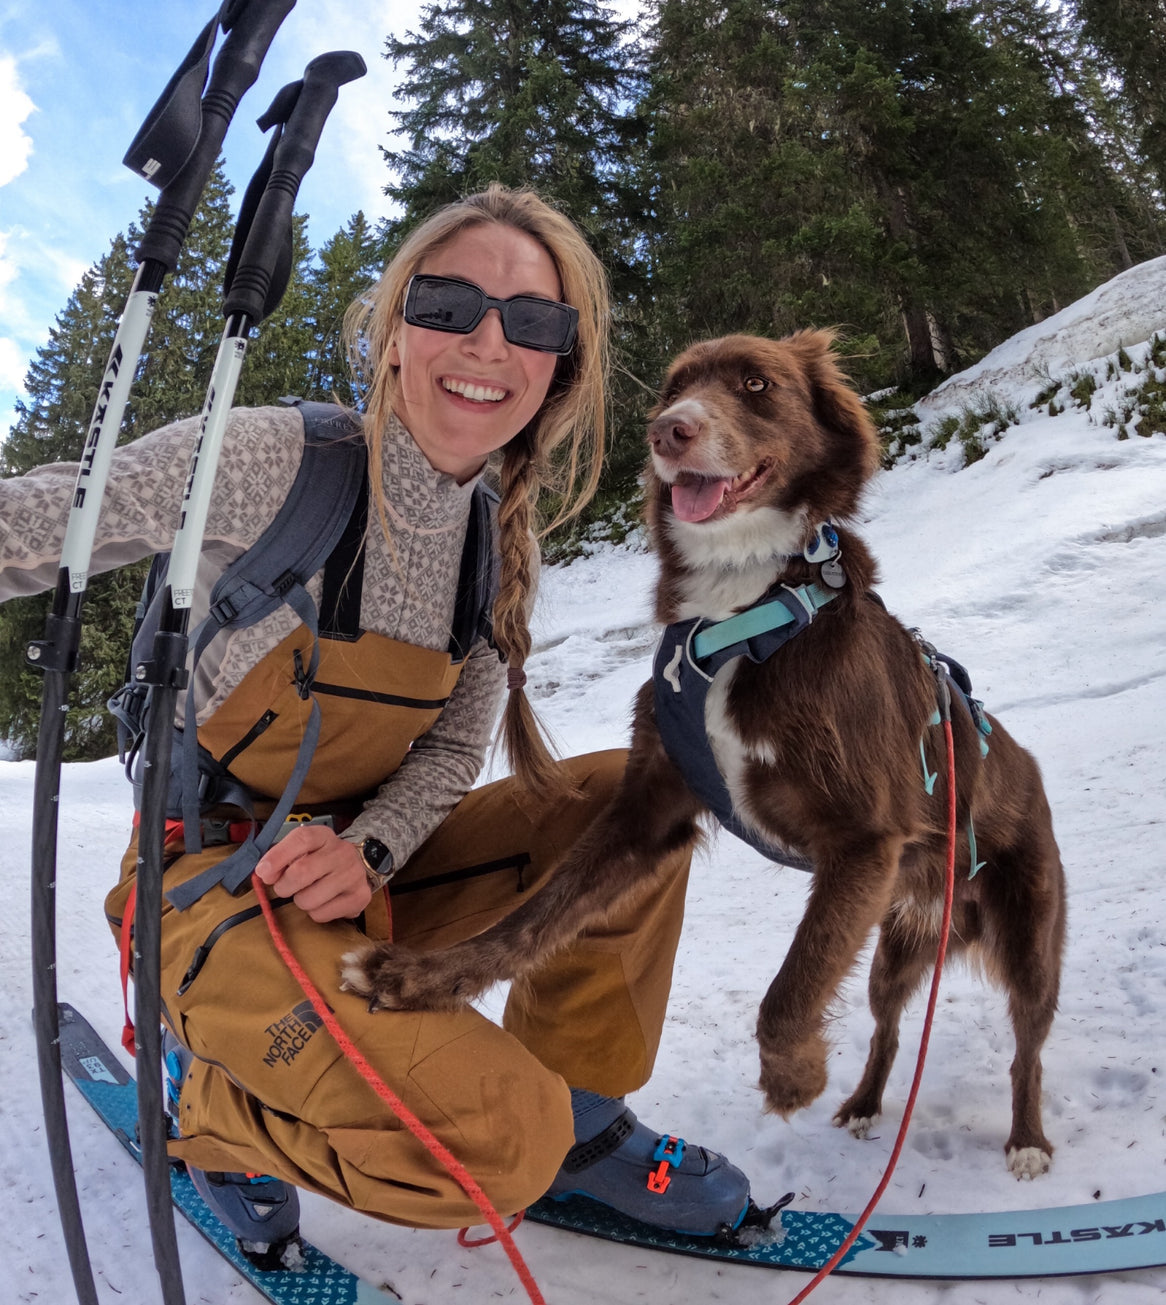 chrissi skis with her dog.